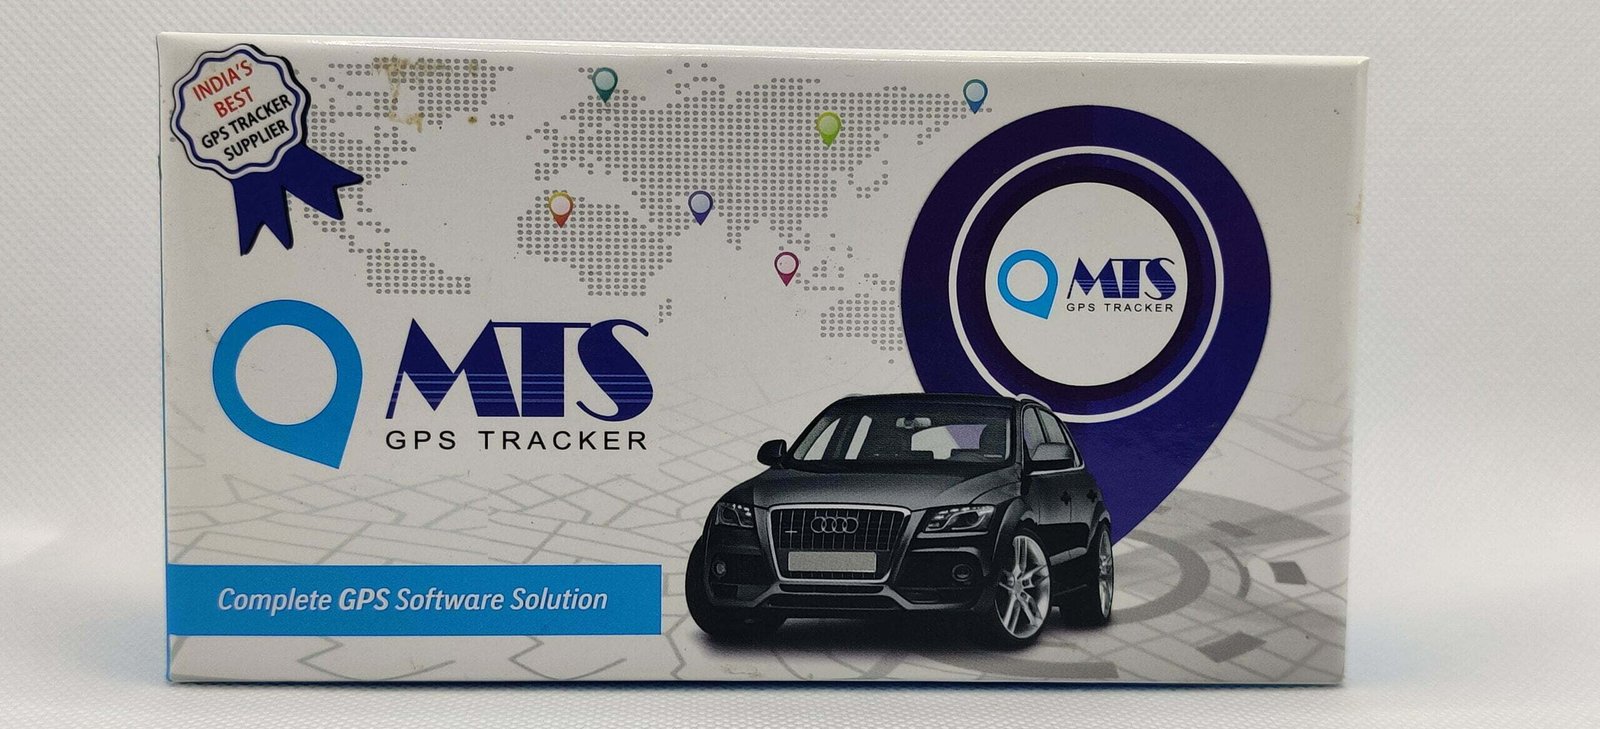 Buy GPS For Tracking - OnRide